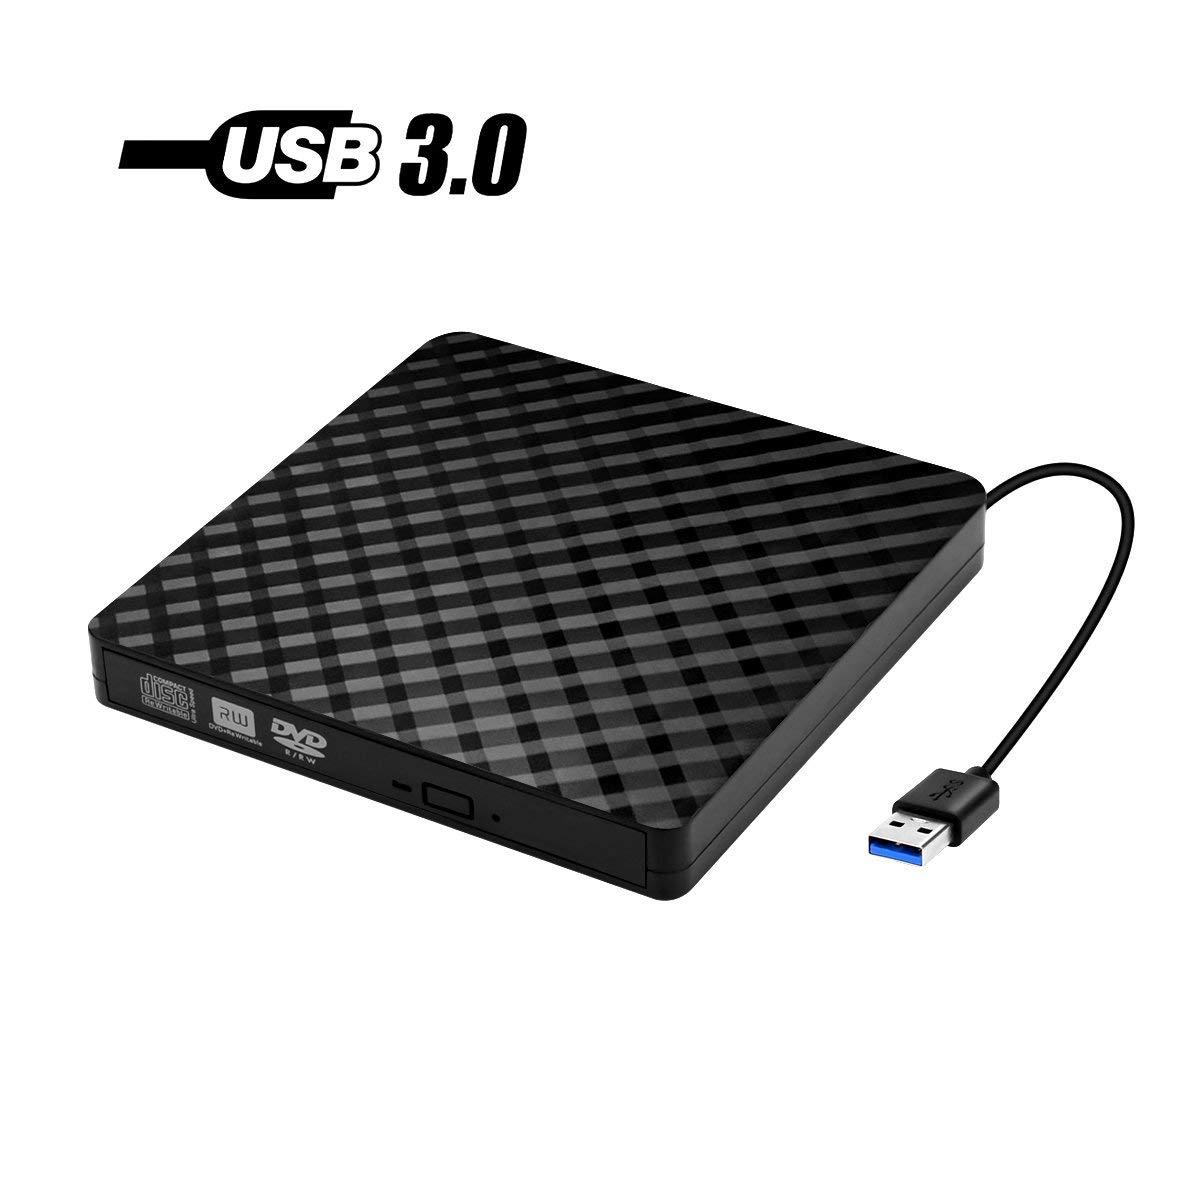 External Cd Drive For Mac And Windows